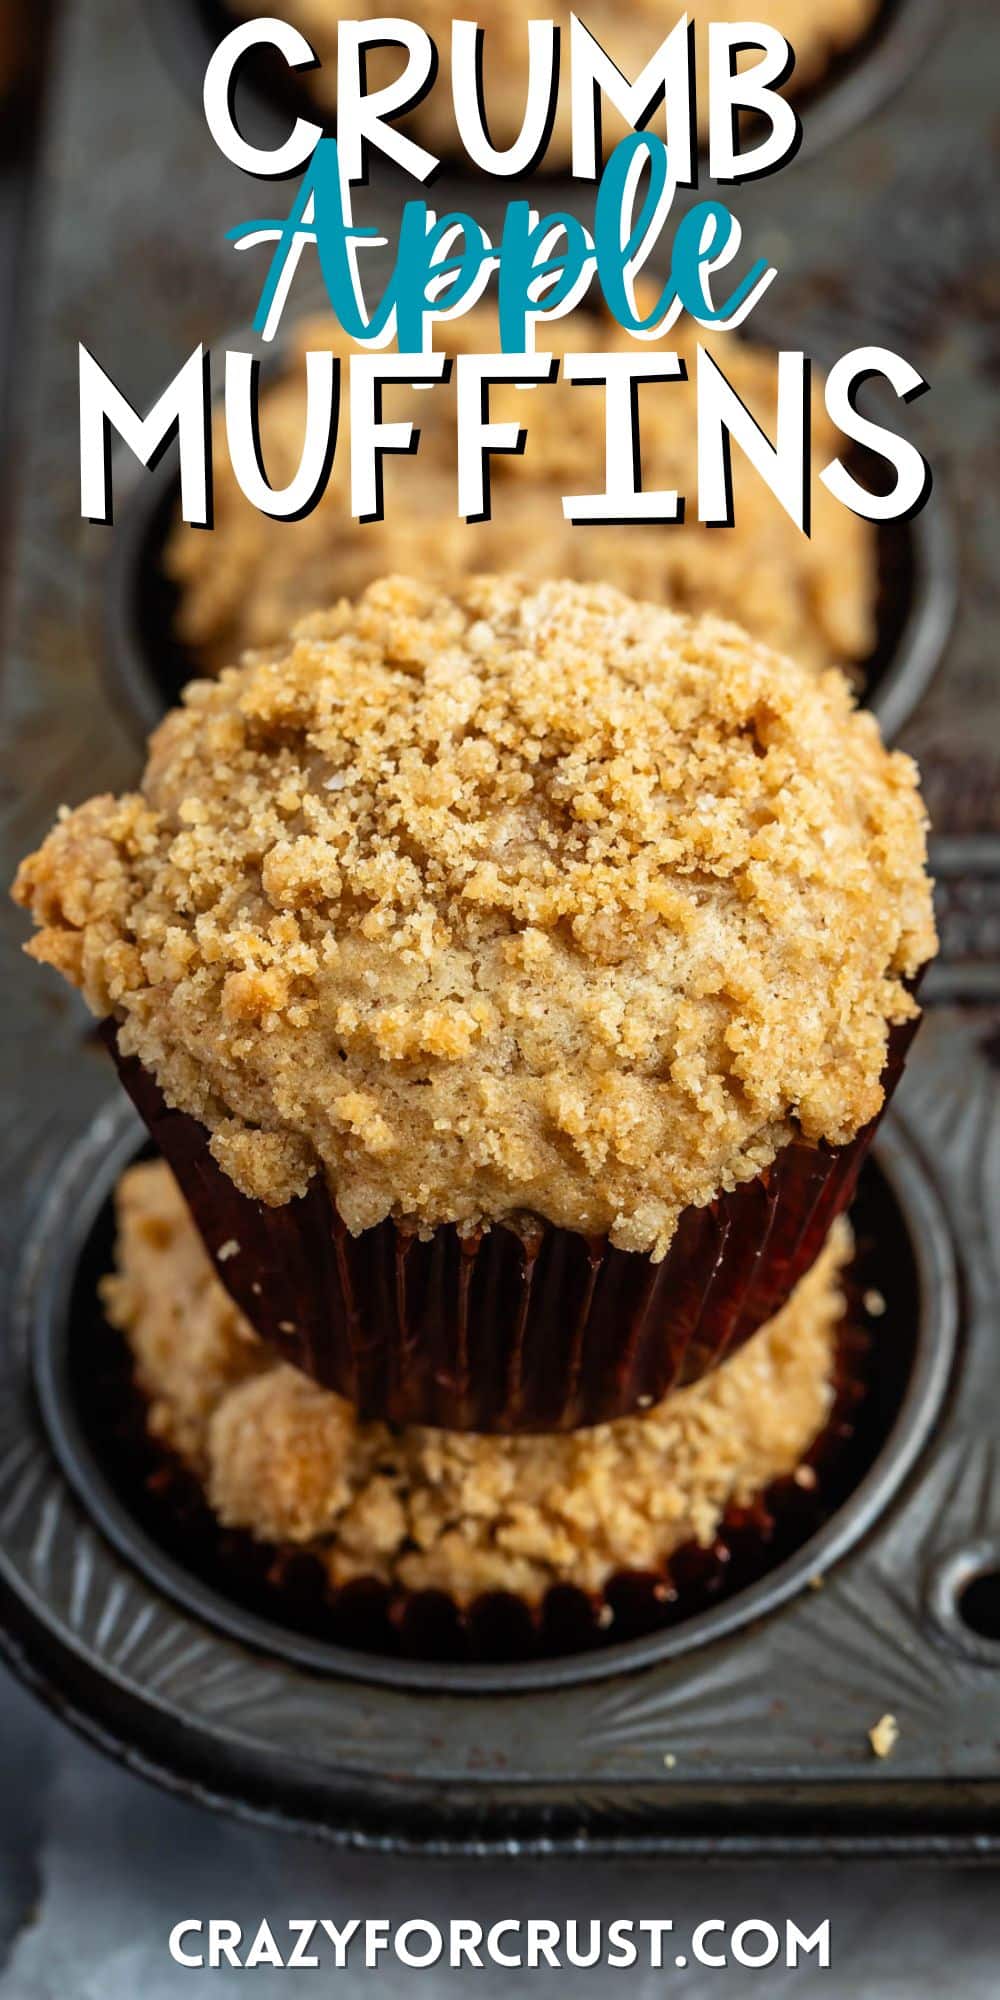 apple muffins in a brown cupcake tin with a crumble topping with words on the image.